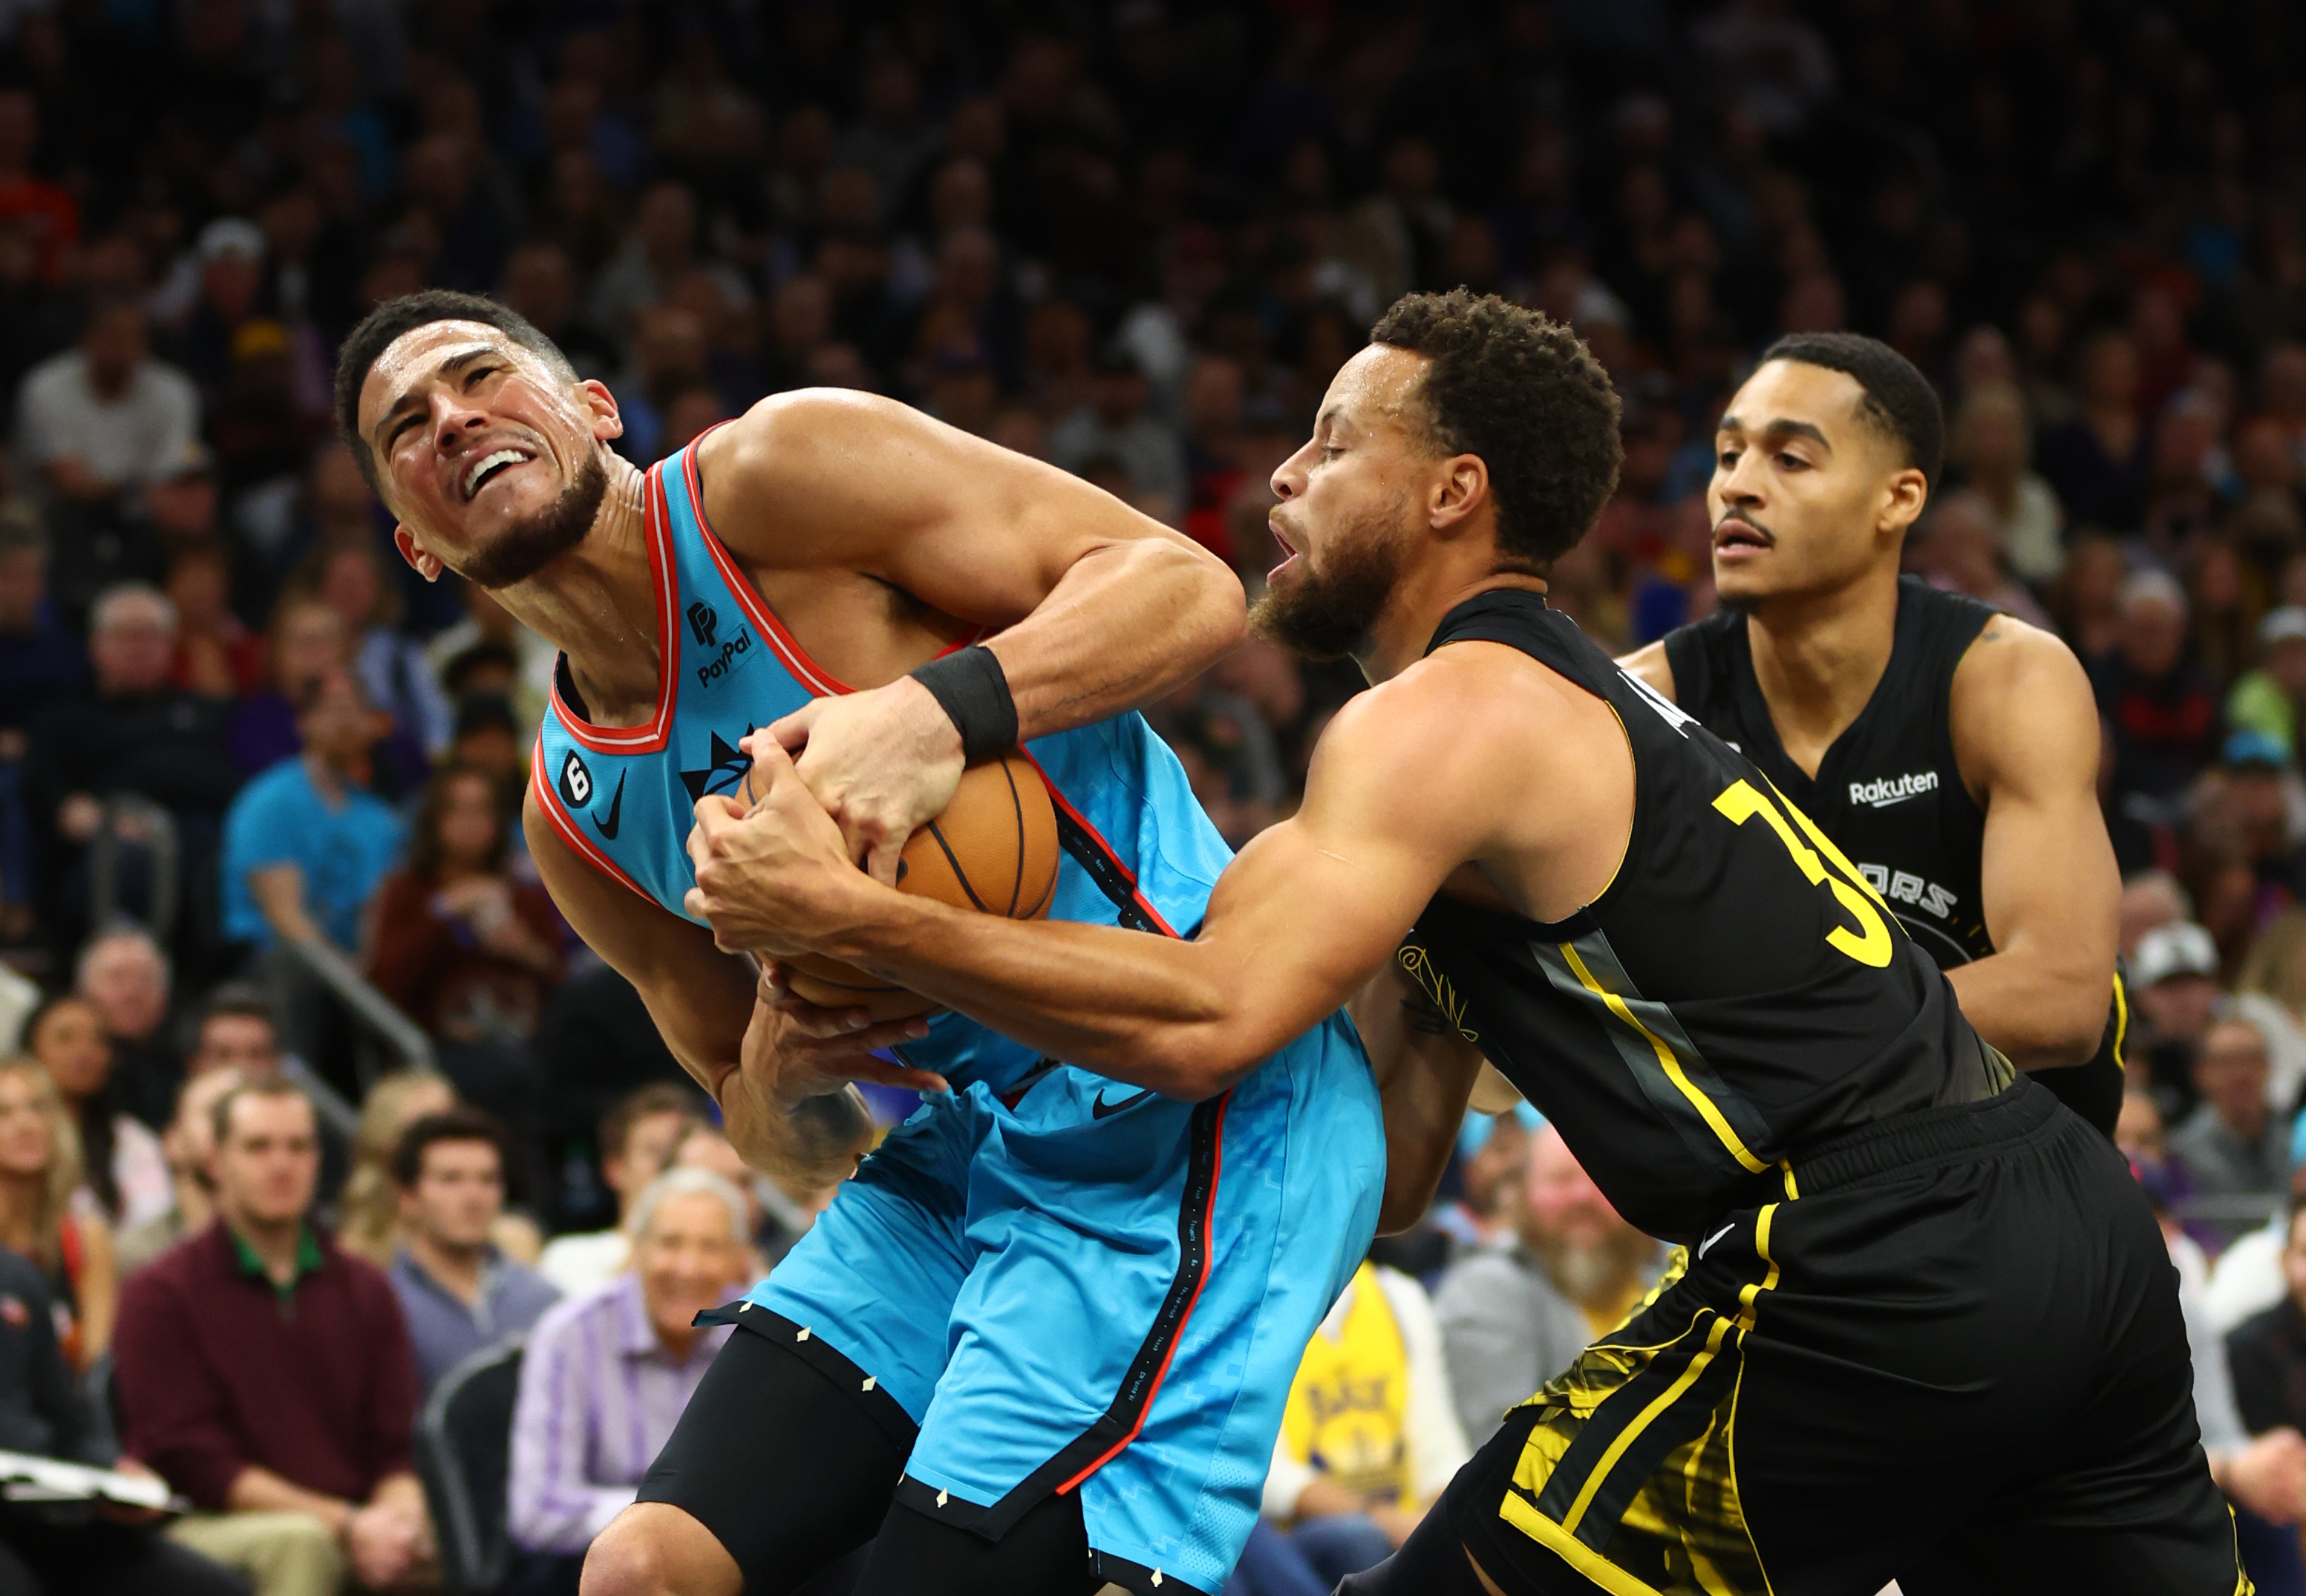 Steph Curry and Devin Booker fighting for the ball with Jordan Poole in the background